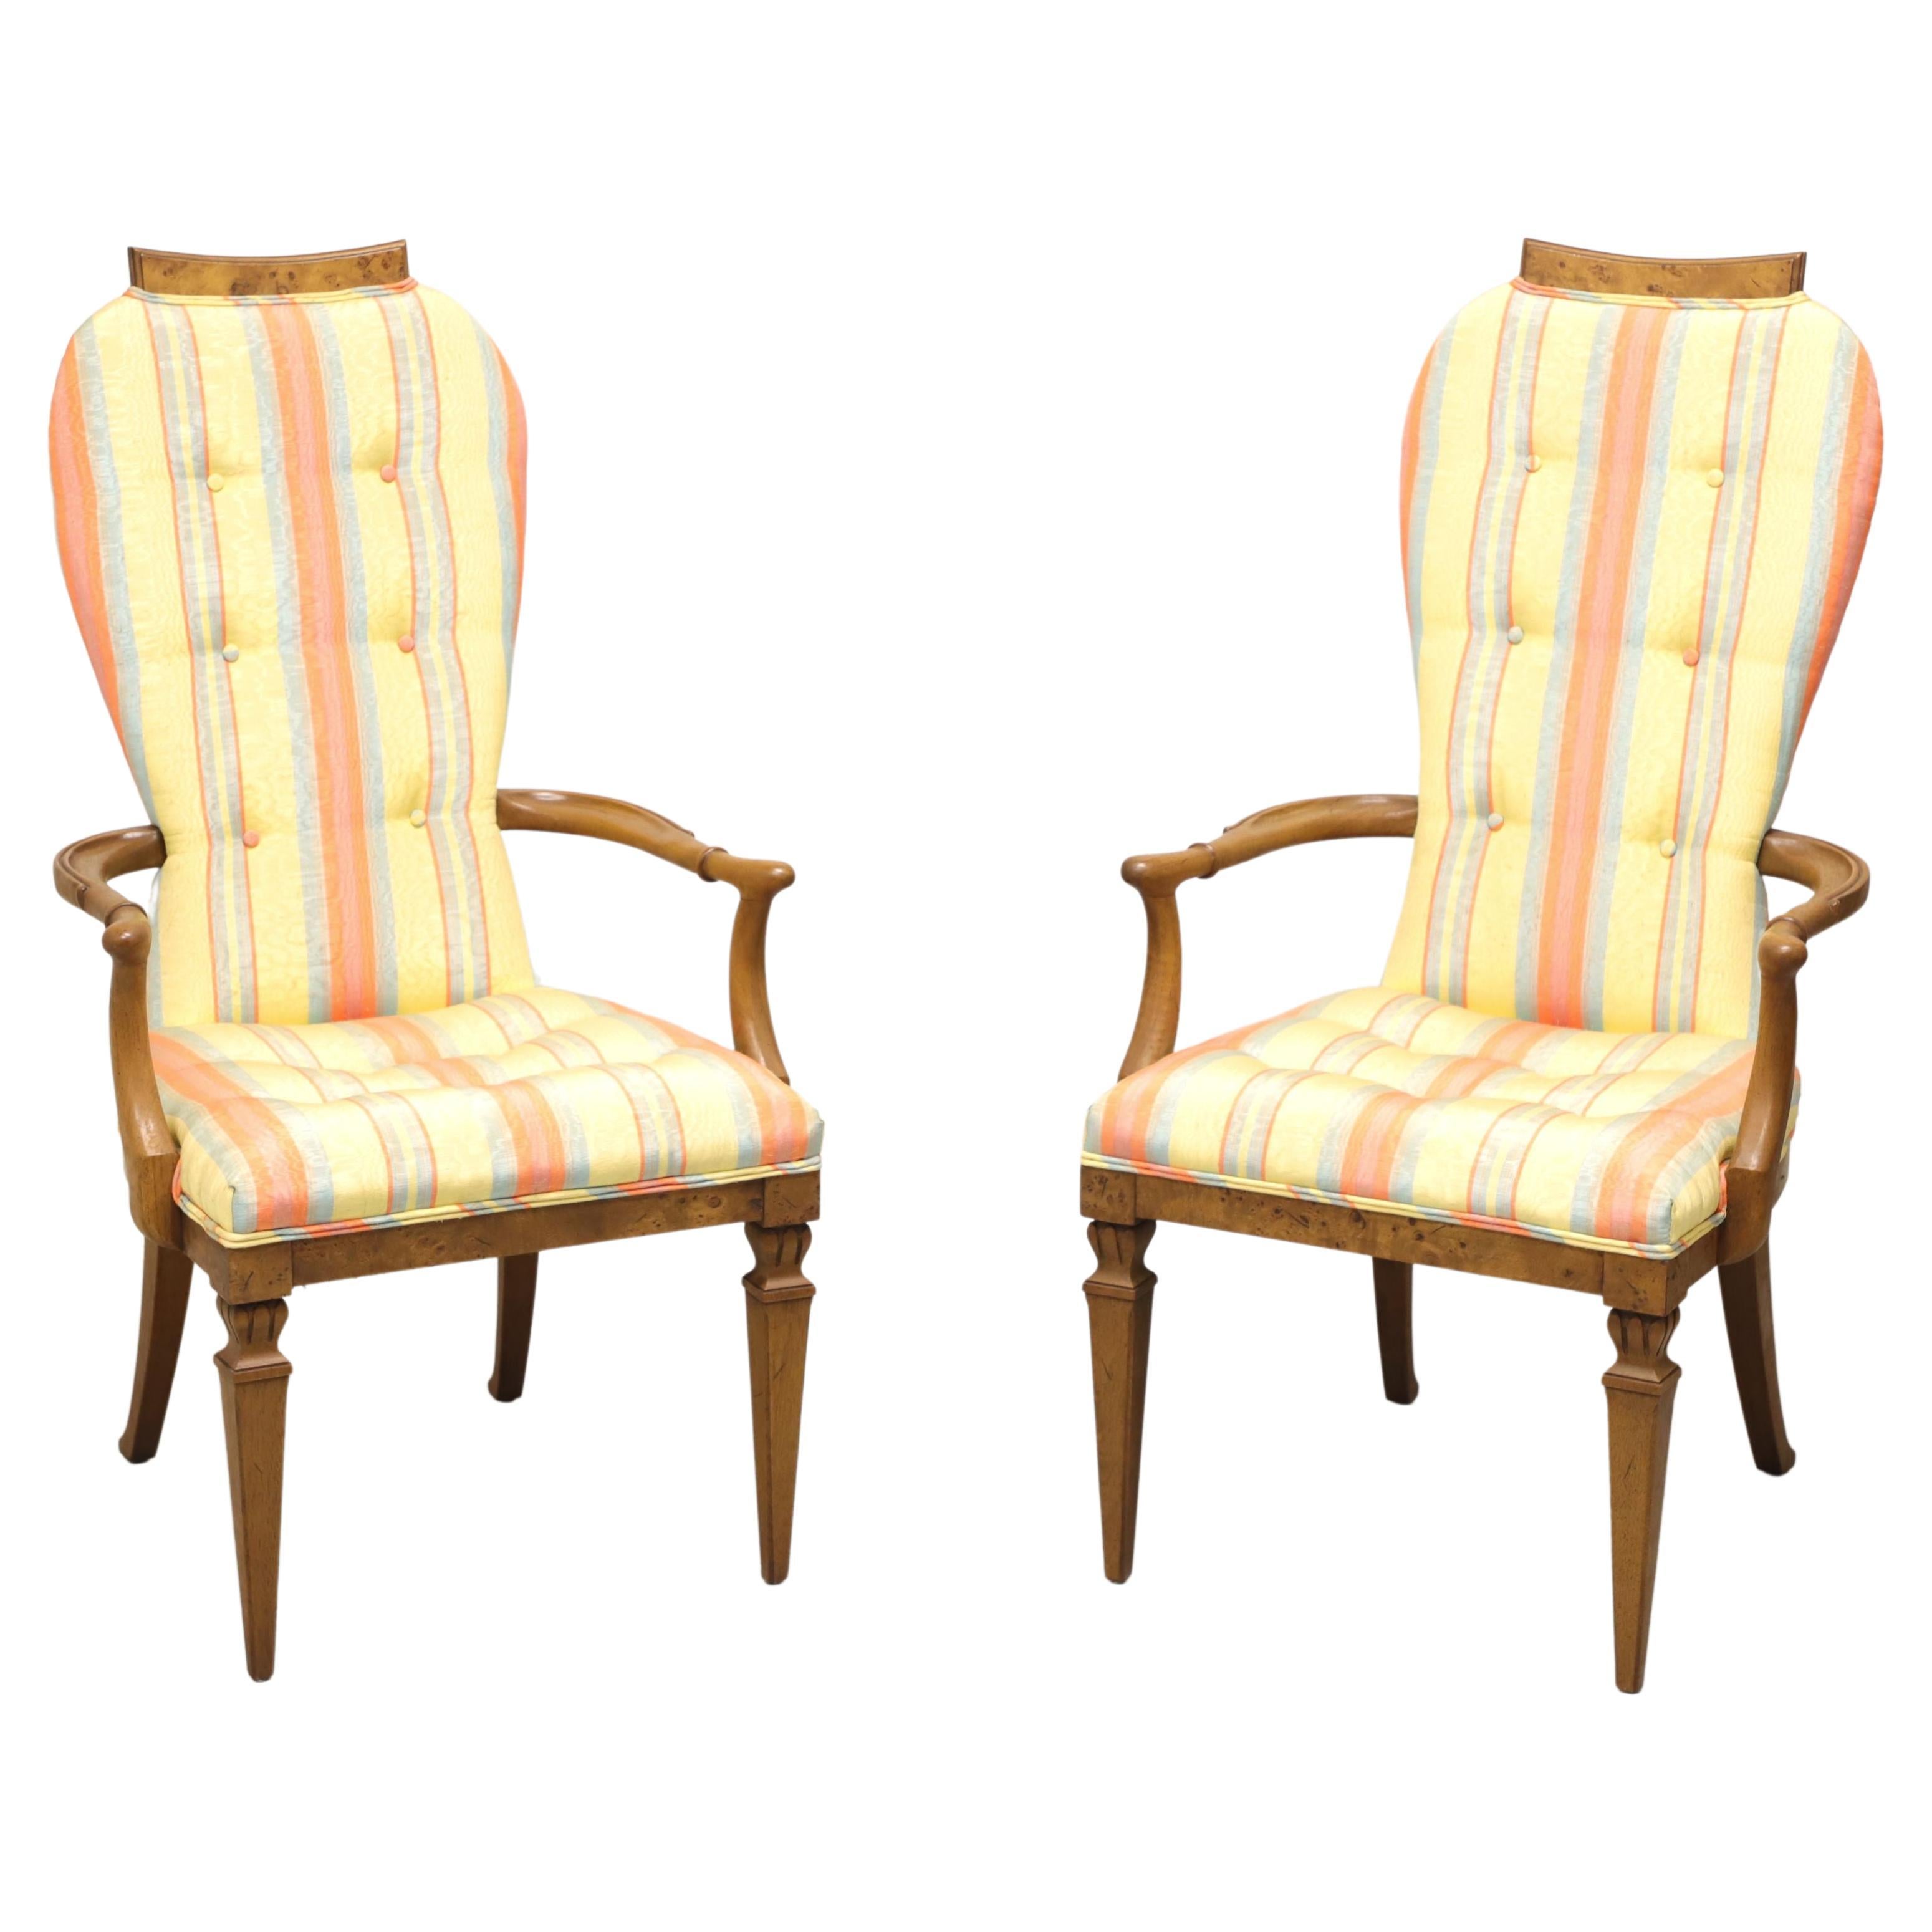 TOMLINSON 1960's Neoclassical Upholstered Dining Armchairs - Pair For Sale